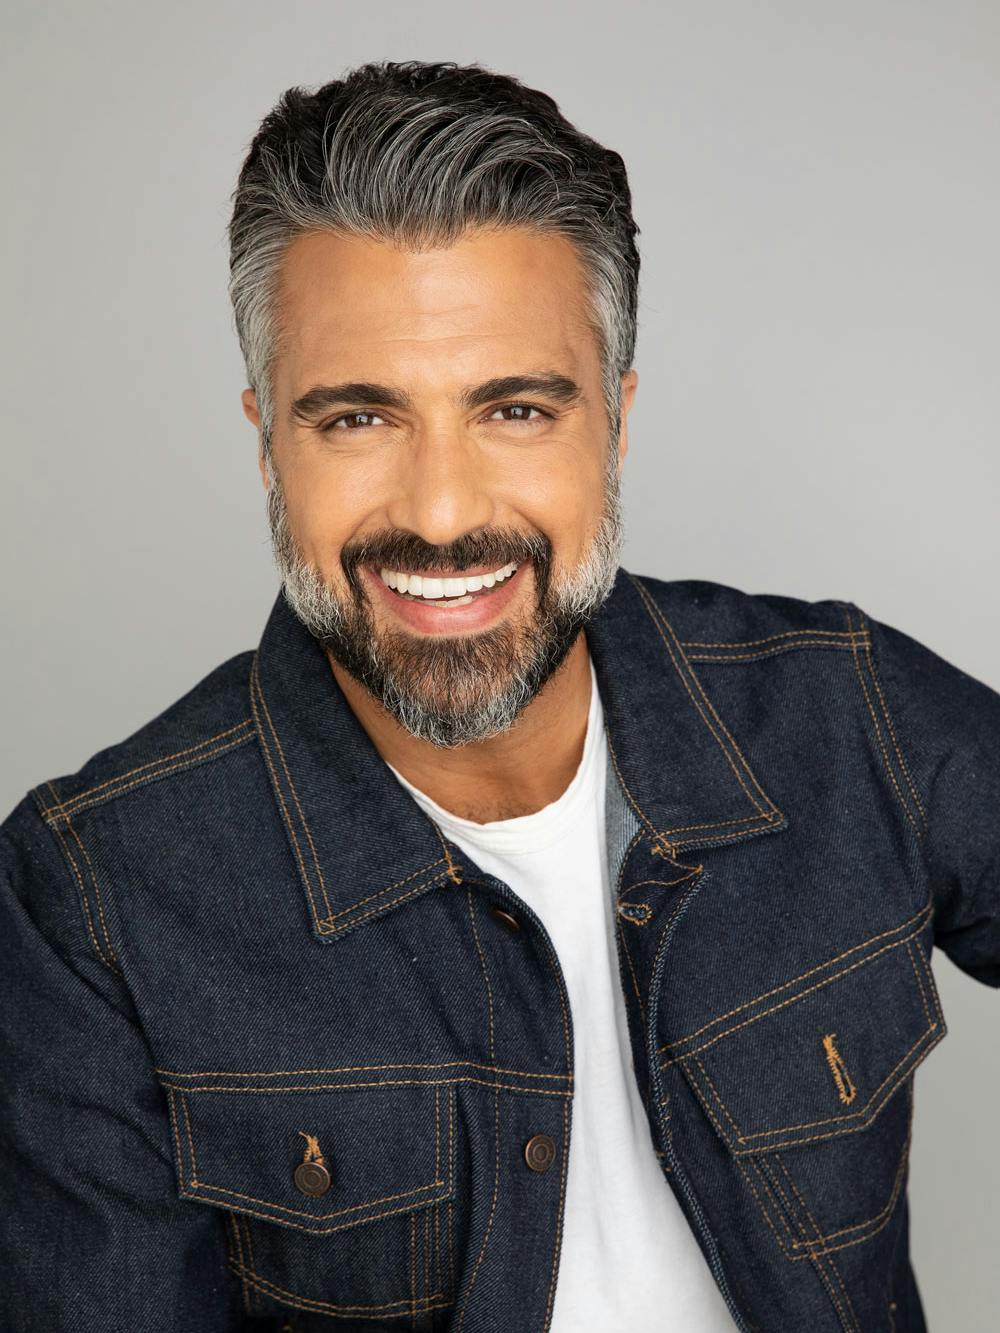 Jaime Camil, one of the most influential Latin American figures globally, teams up with Thor Motor Coach for a new motorhome. Jaime Camil headshot photo